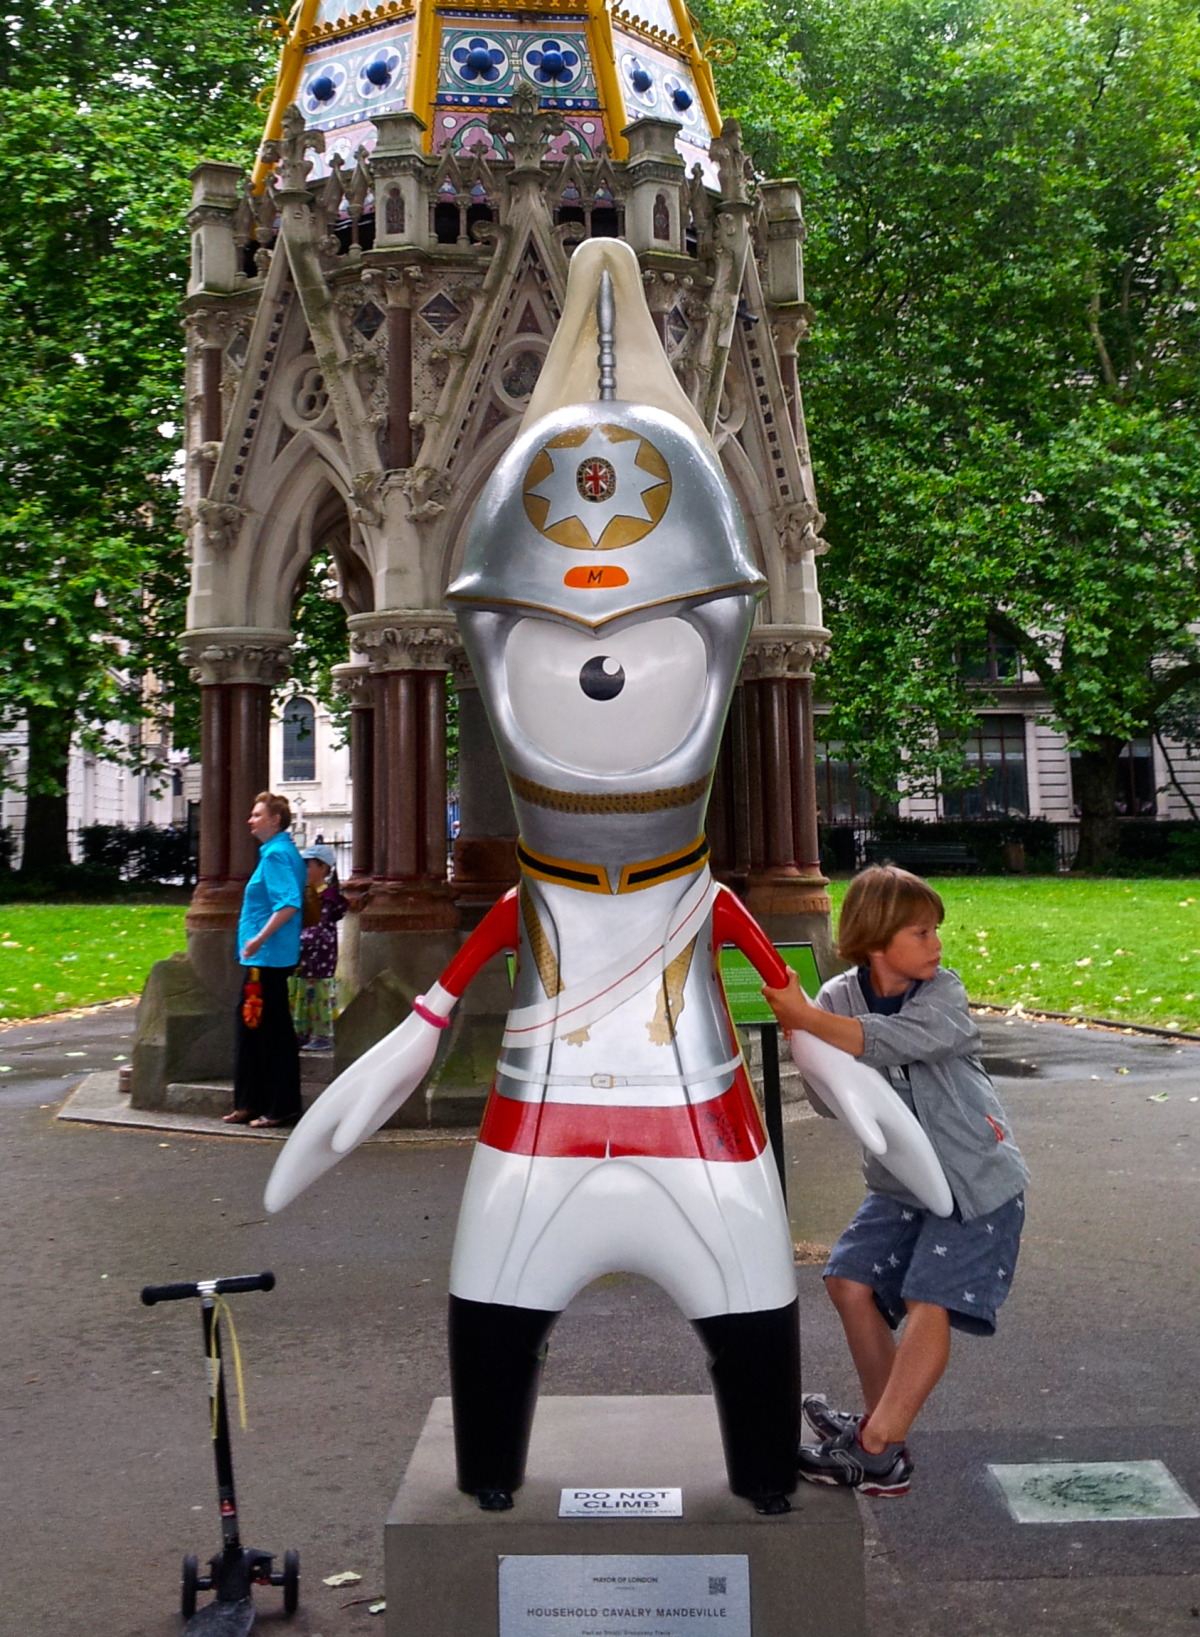 Household Cavalry Mandeville